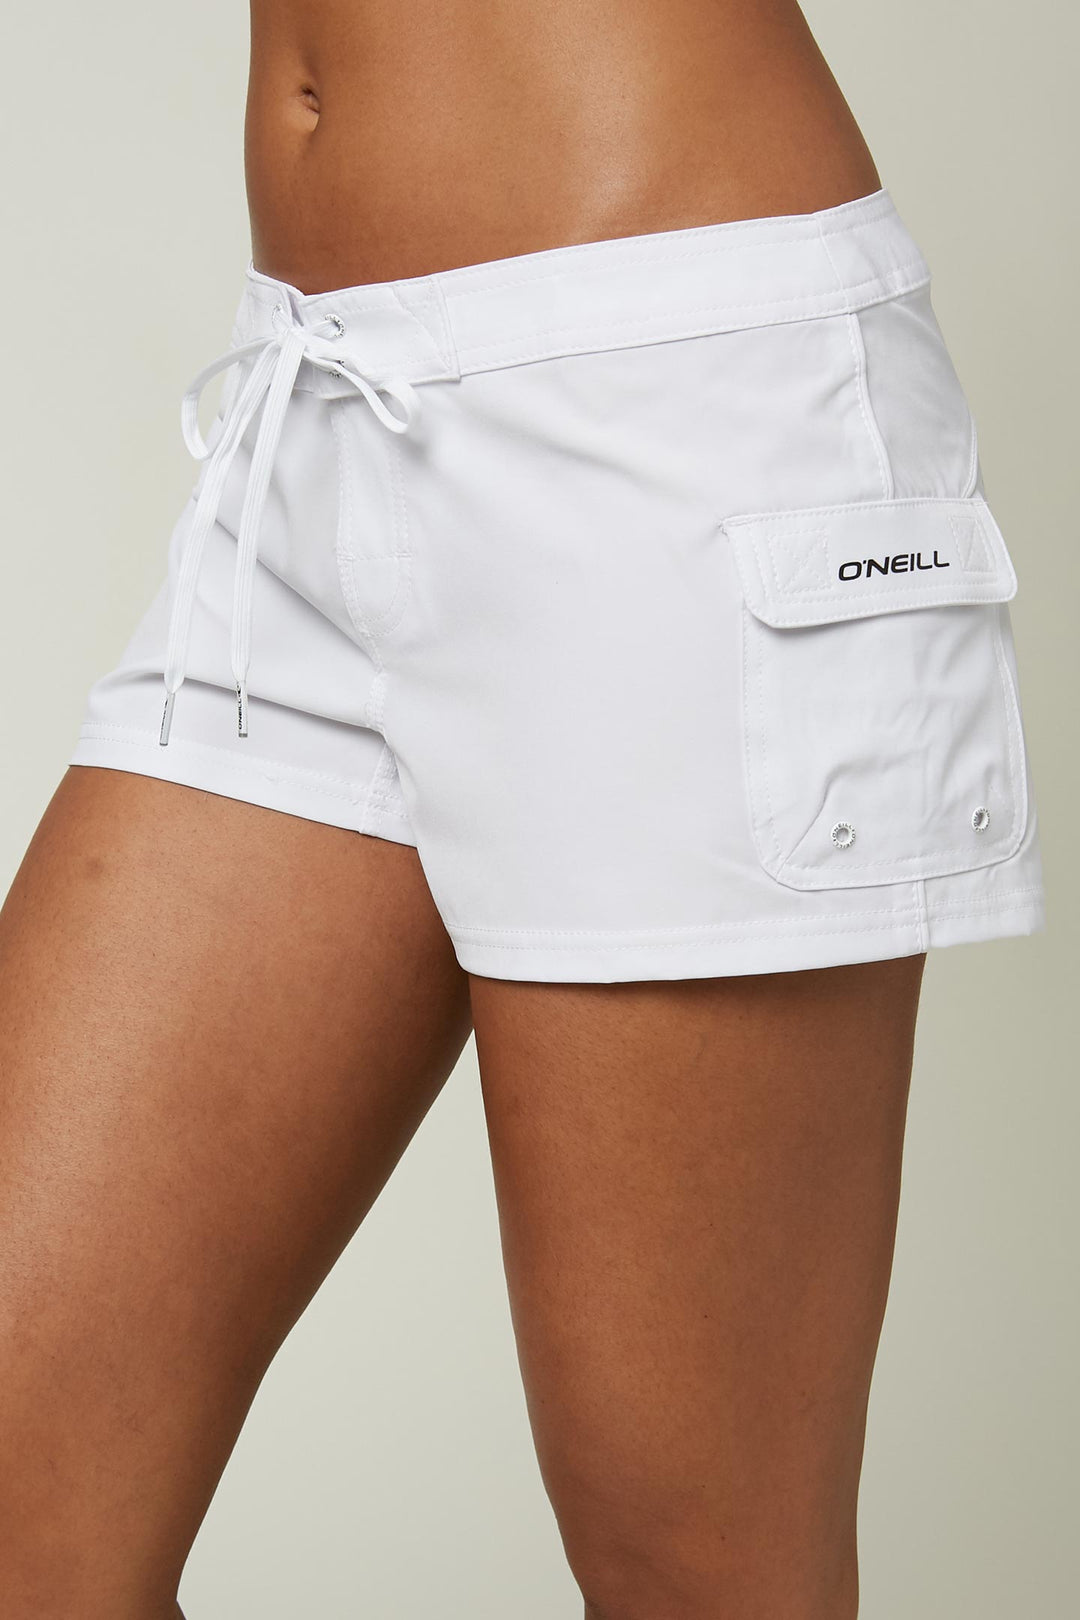 The 19 Best Swim Shorts for Women—For Swimming, Surfing, or Just Because